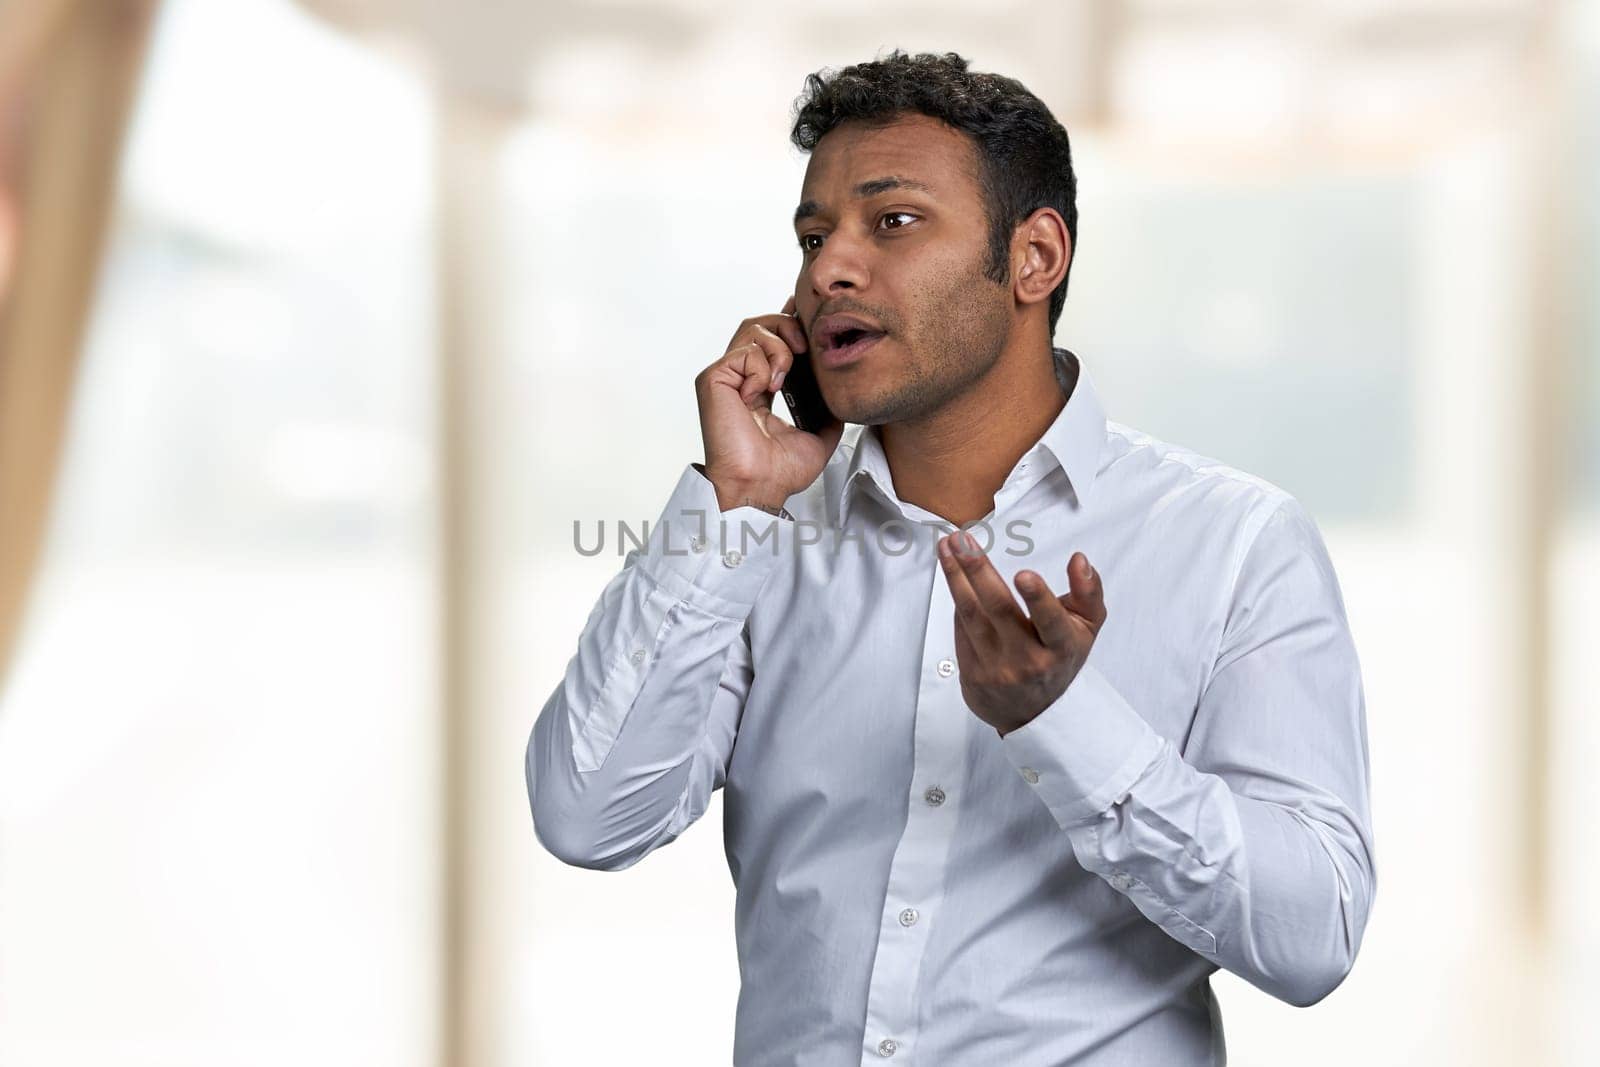 Serious young businessman talking to someone on mobile phone. Blur interior background.